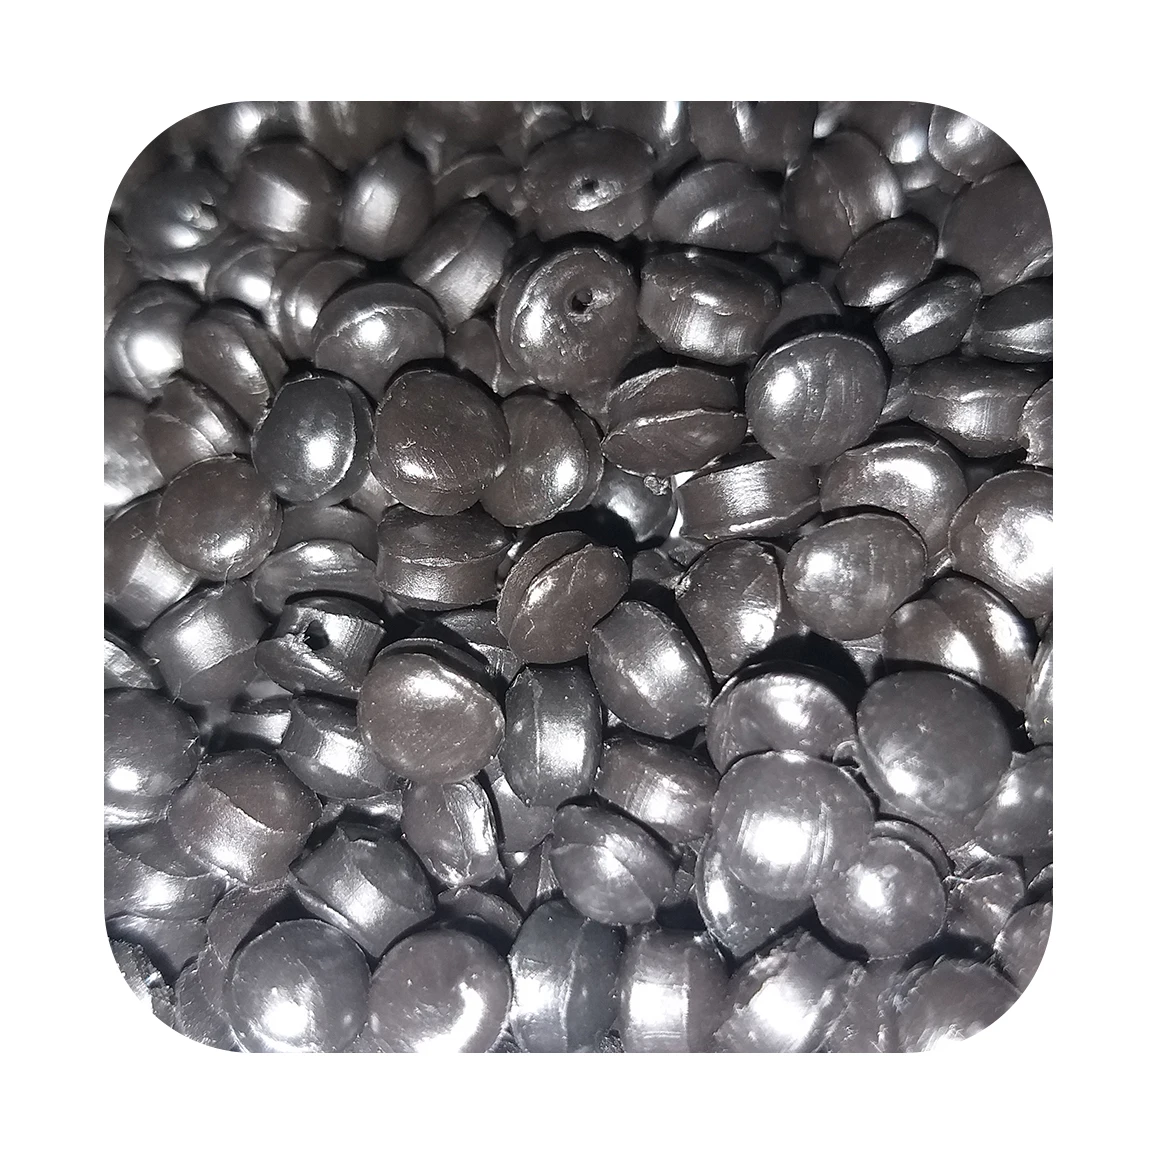 Recycled Granulated Plastic Polymer Polypropylene (PÁGINAS), Round Shape, Industrial/Business Usage, Lowest Prices on The Market